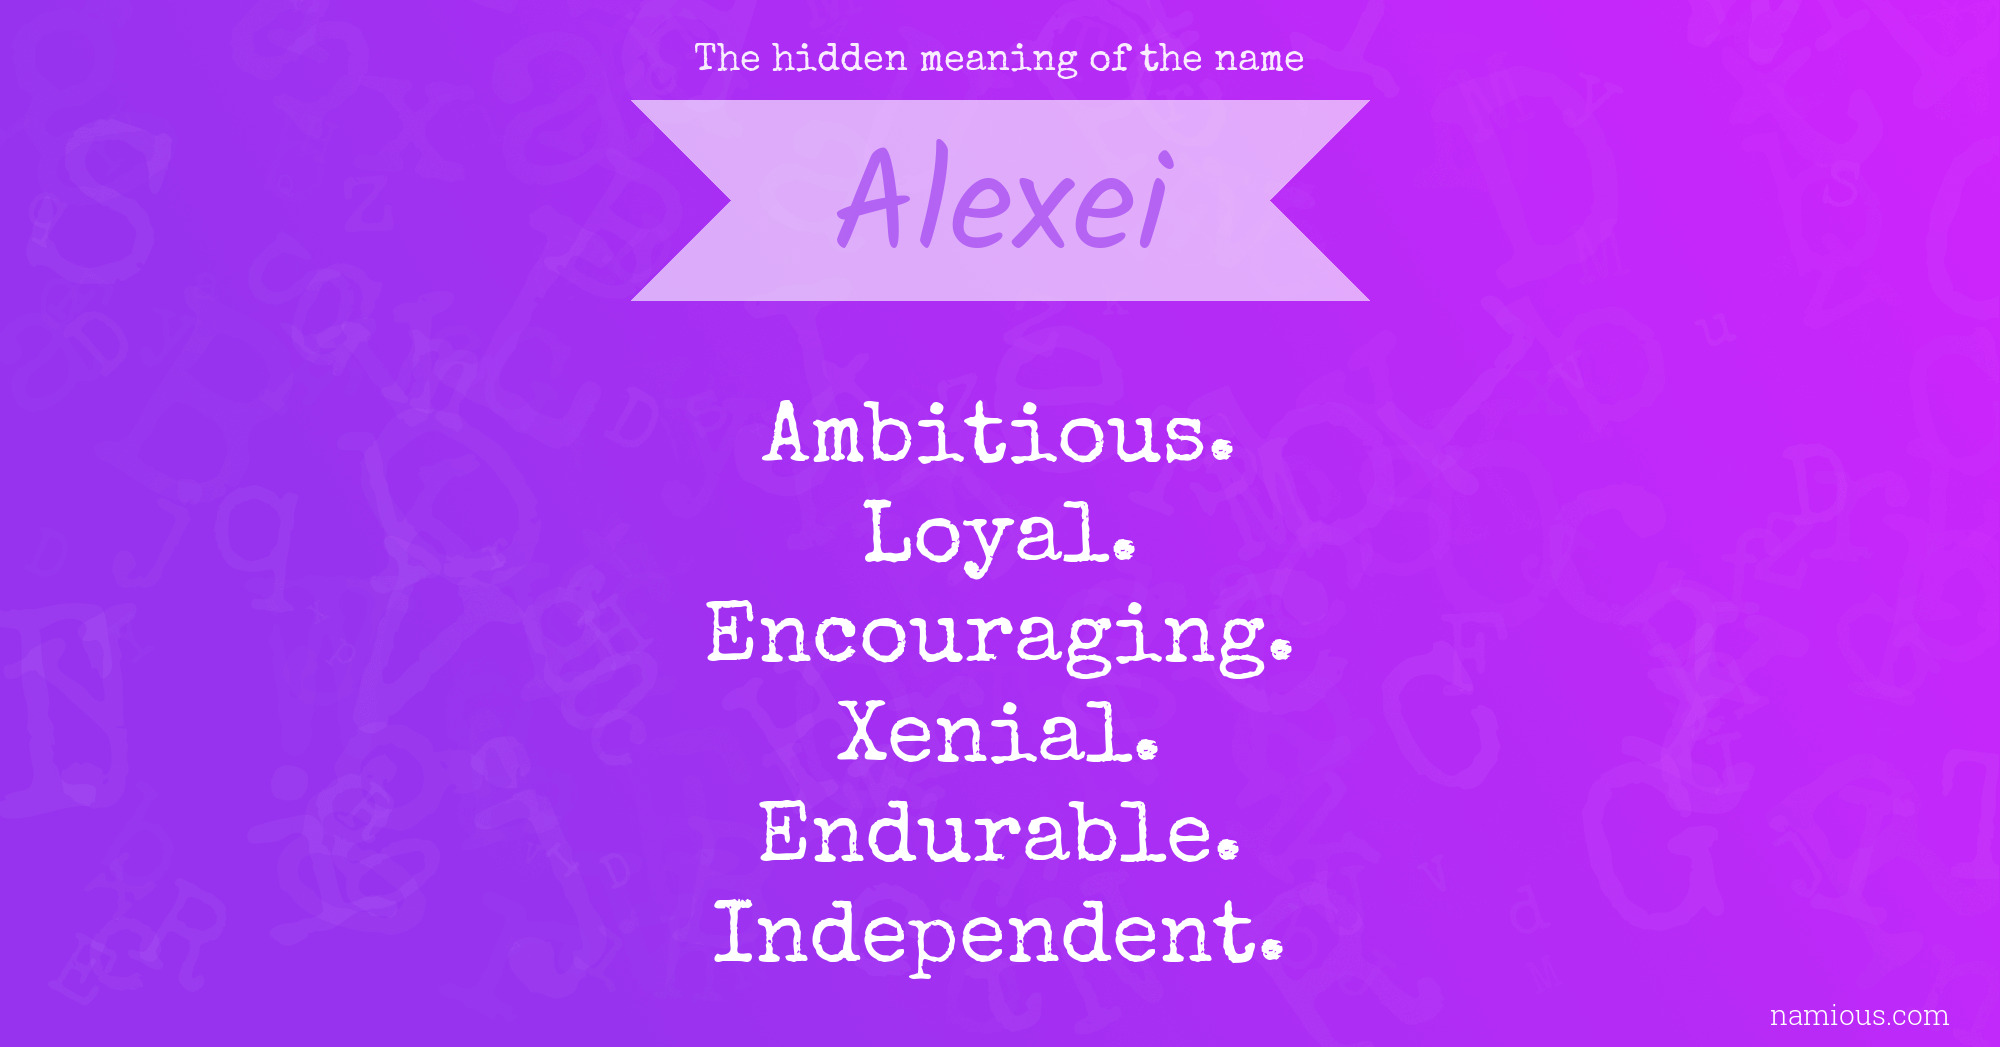 The hidden meaning of the name Alexei